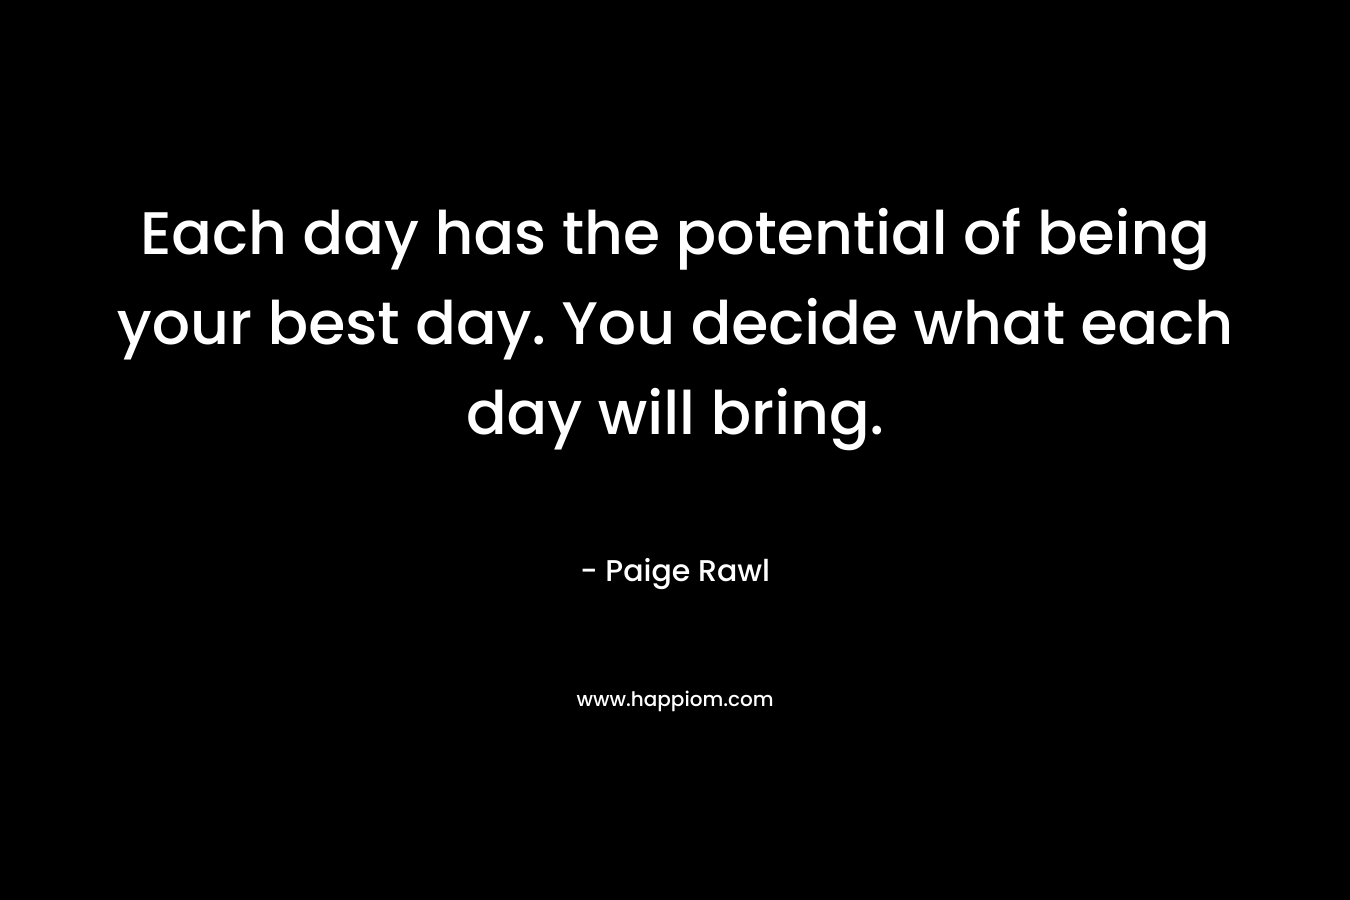 Each day has the potential of being your best day. You decide what each day will bring. – Paige Rawl